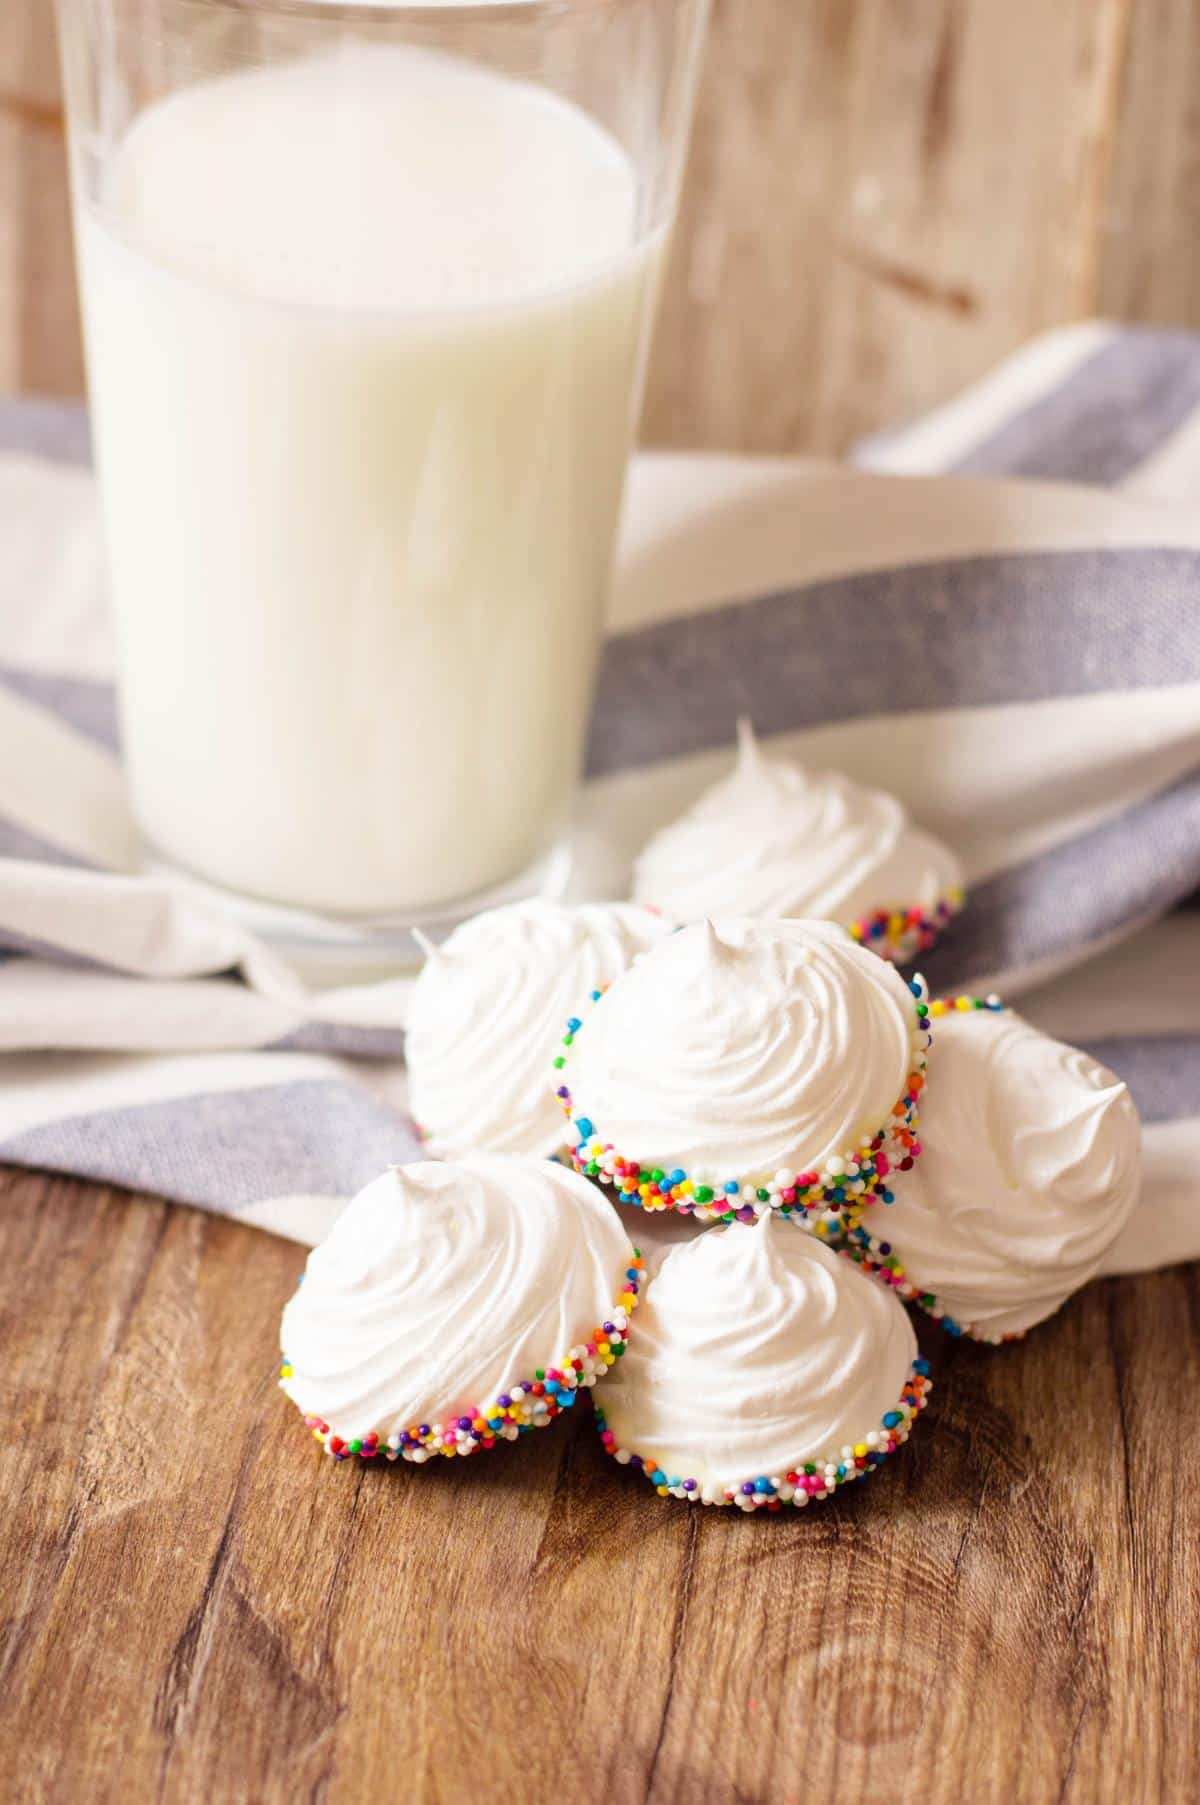 Mini Meringues with sprinkles on a wooden table with a glass of milk on the side.